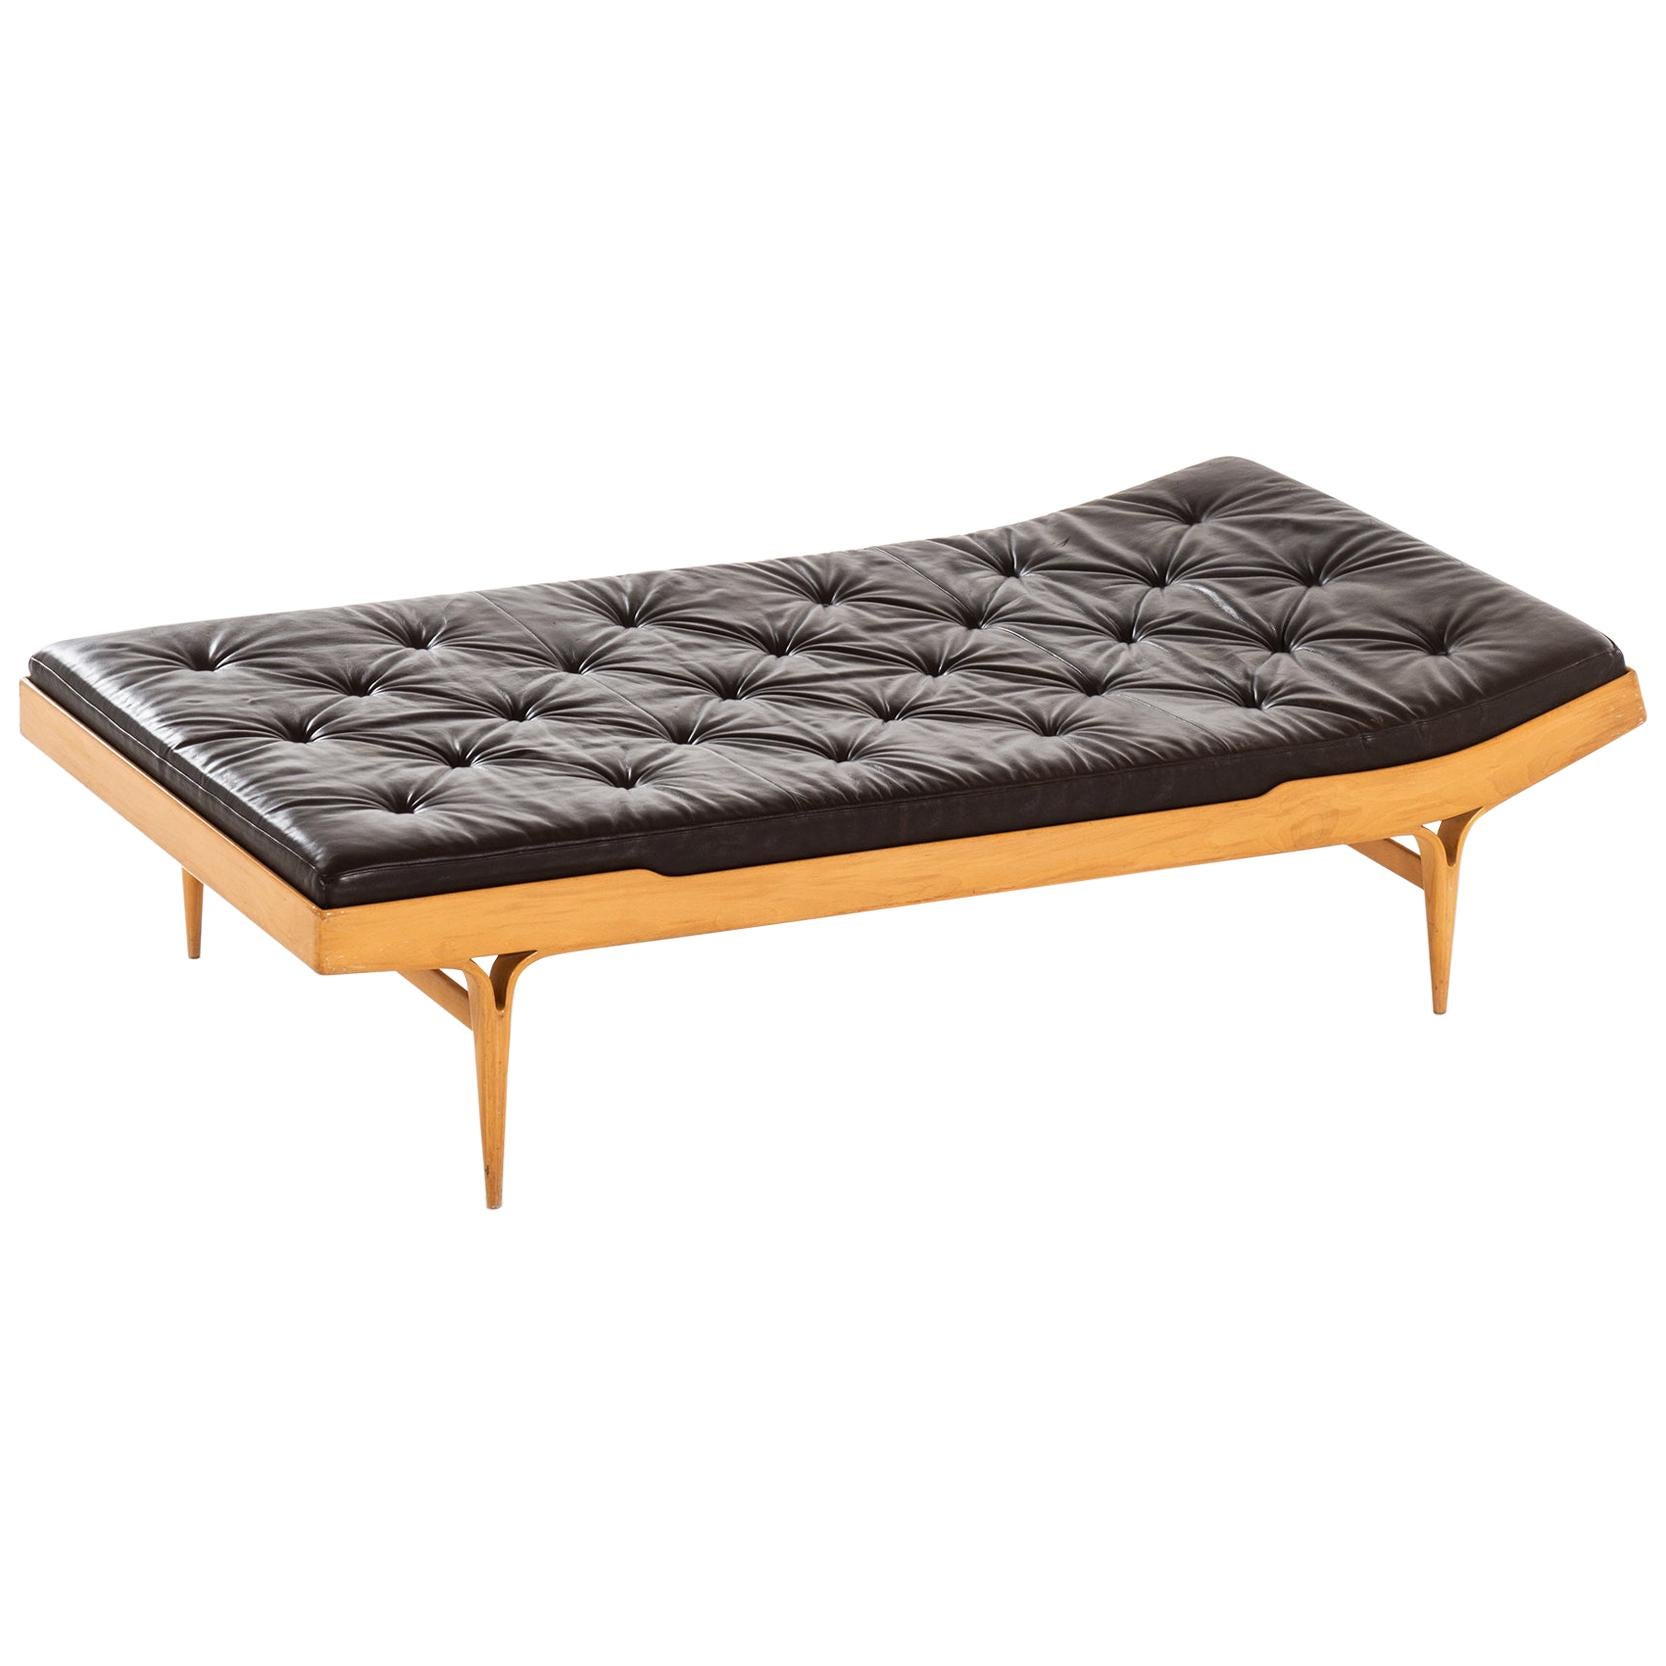 Bruno Mathsson Daybed Model Berlin Produced by Karl Mathsson in Sweden